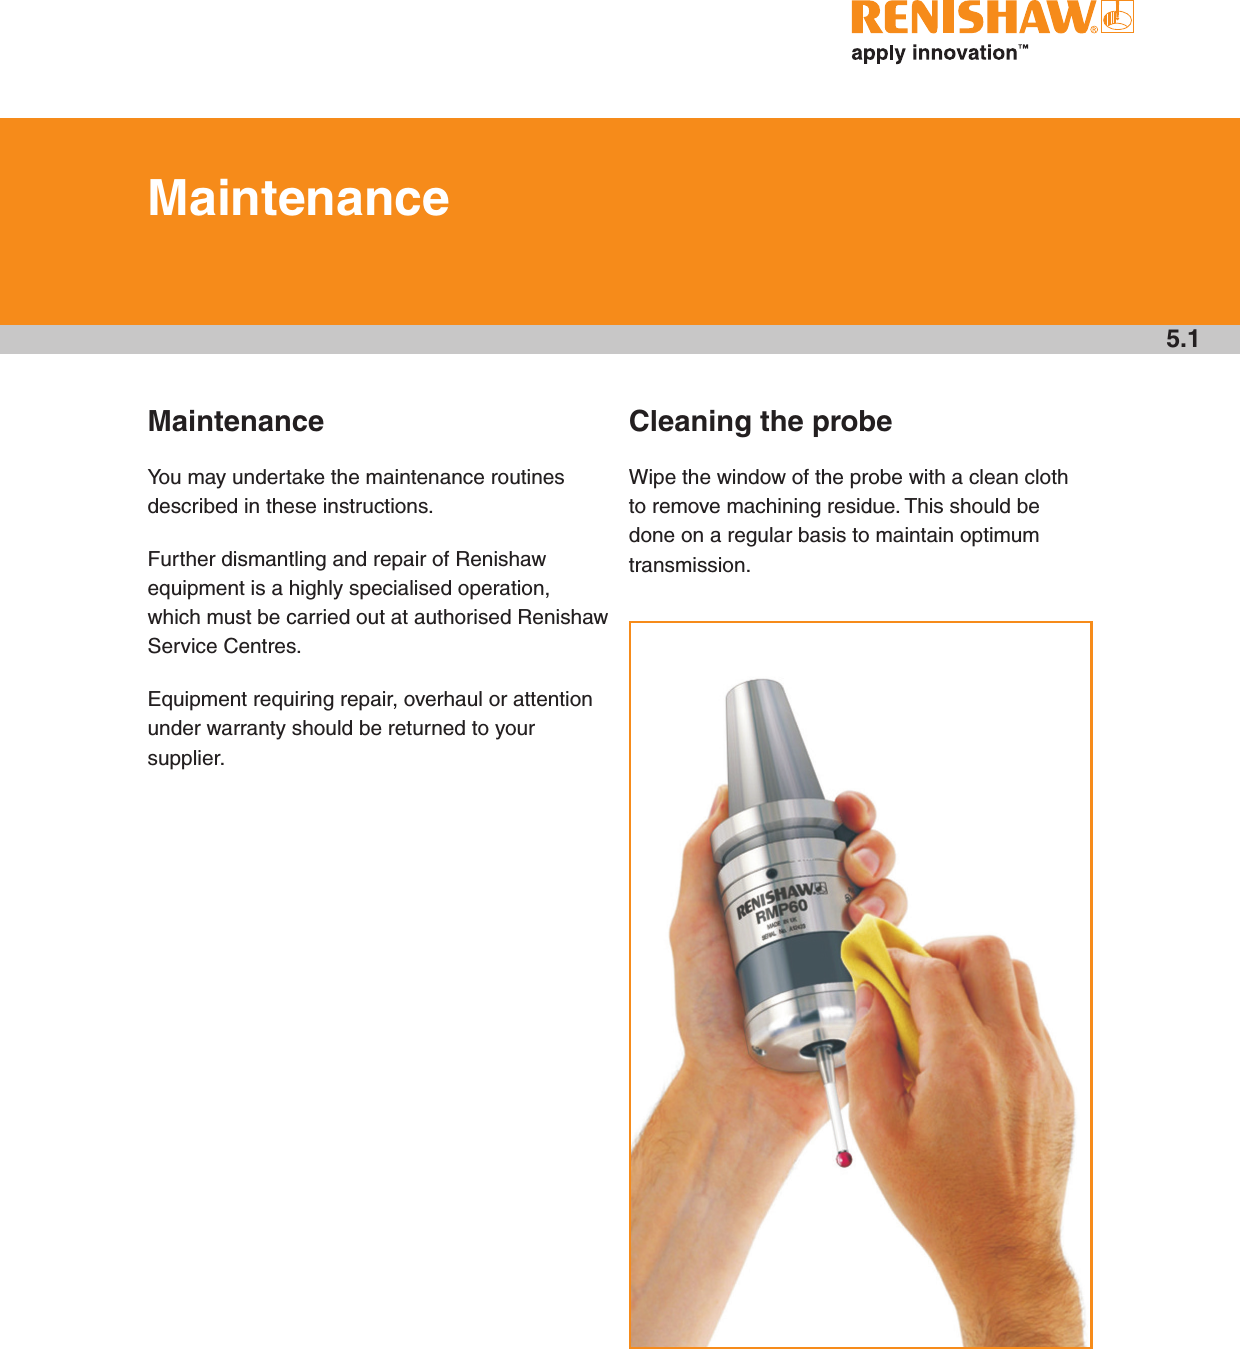 5.1MaintenanceYou may undertake the maintenance routines described in these instructions.Further dismantling and repair of Renishaw equipment is a highly specialised operation, which must be carried out at authorised Renishaw Service Centres.Equipment requiring repair, overhaul or attention under warranty should be returned to your supplier.Cleaning the probeWipe the window of the probe with a clean cloth to remove machining residue. This should be done on a regular basis to maintain optimum transmission.MaintenanceDraft copy  09/07/12